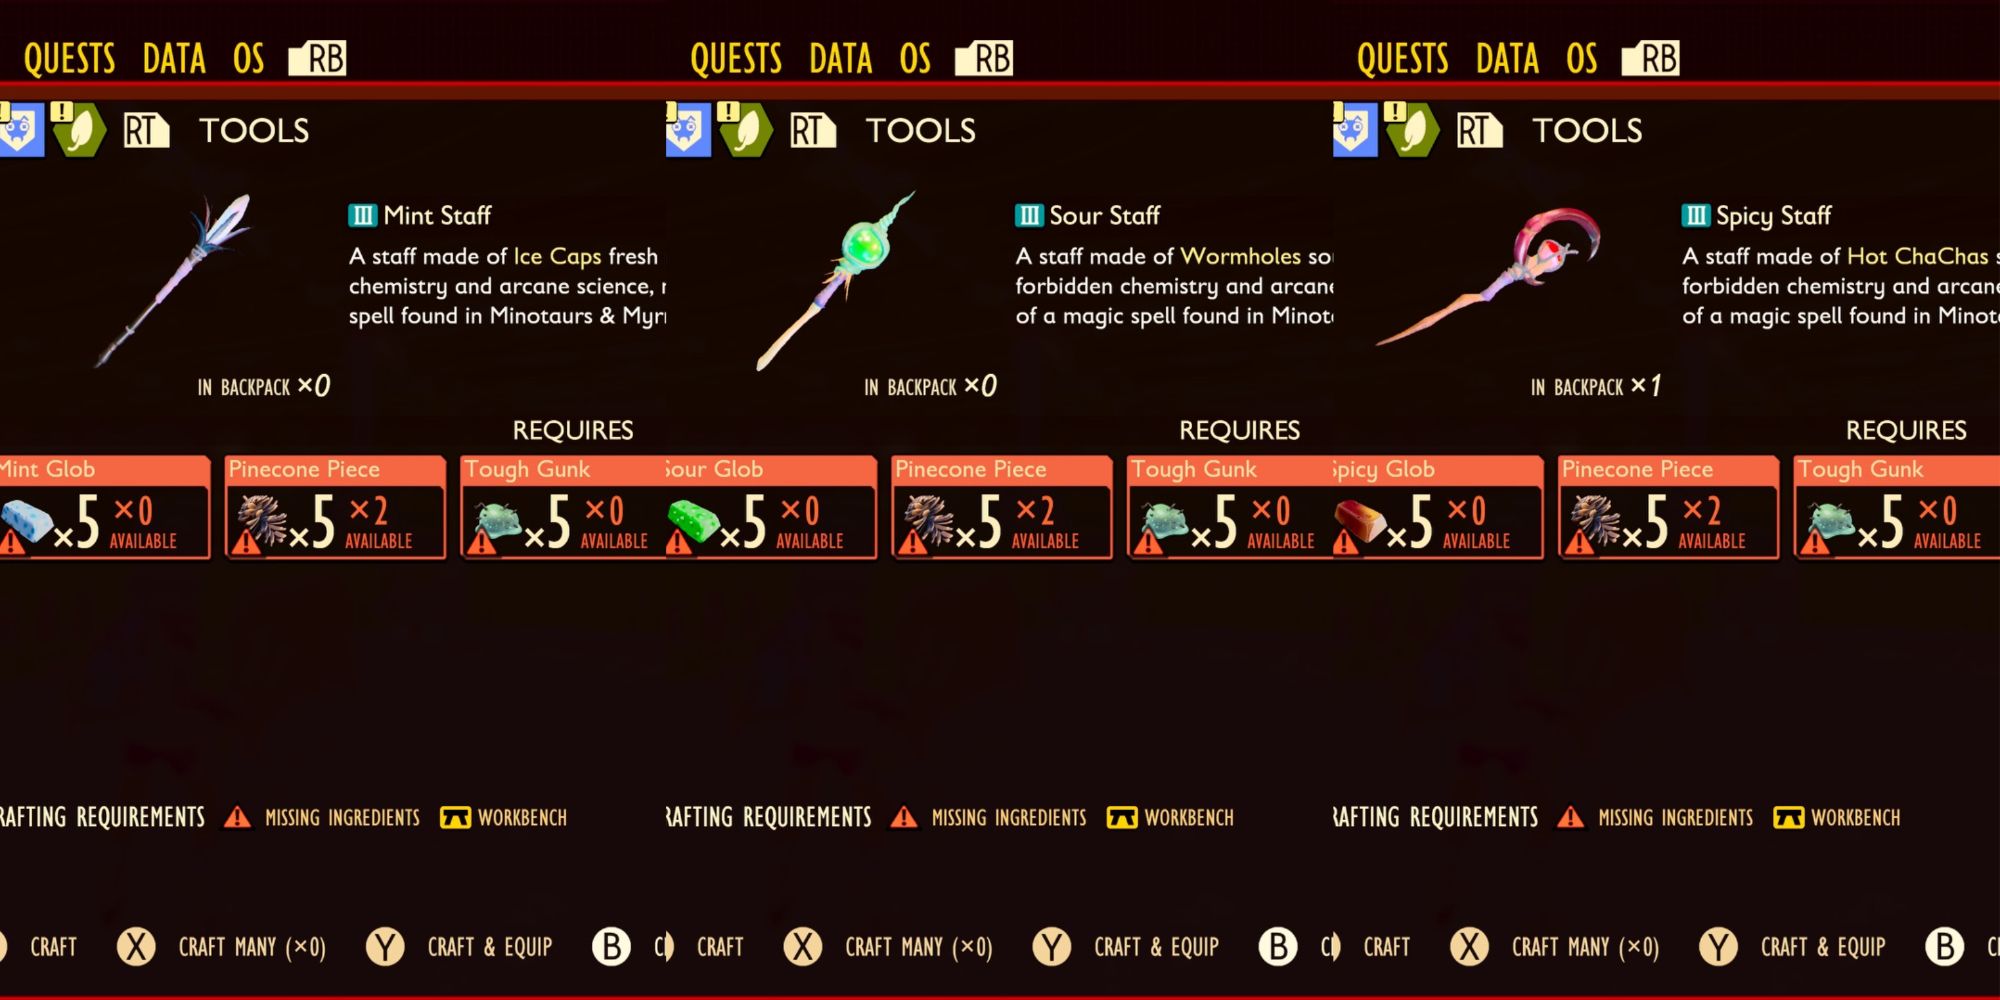 Mint, Sour, and Spicy Staves and their crafting requirements in the inventory menu in Grounded.